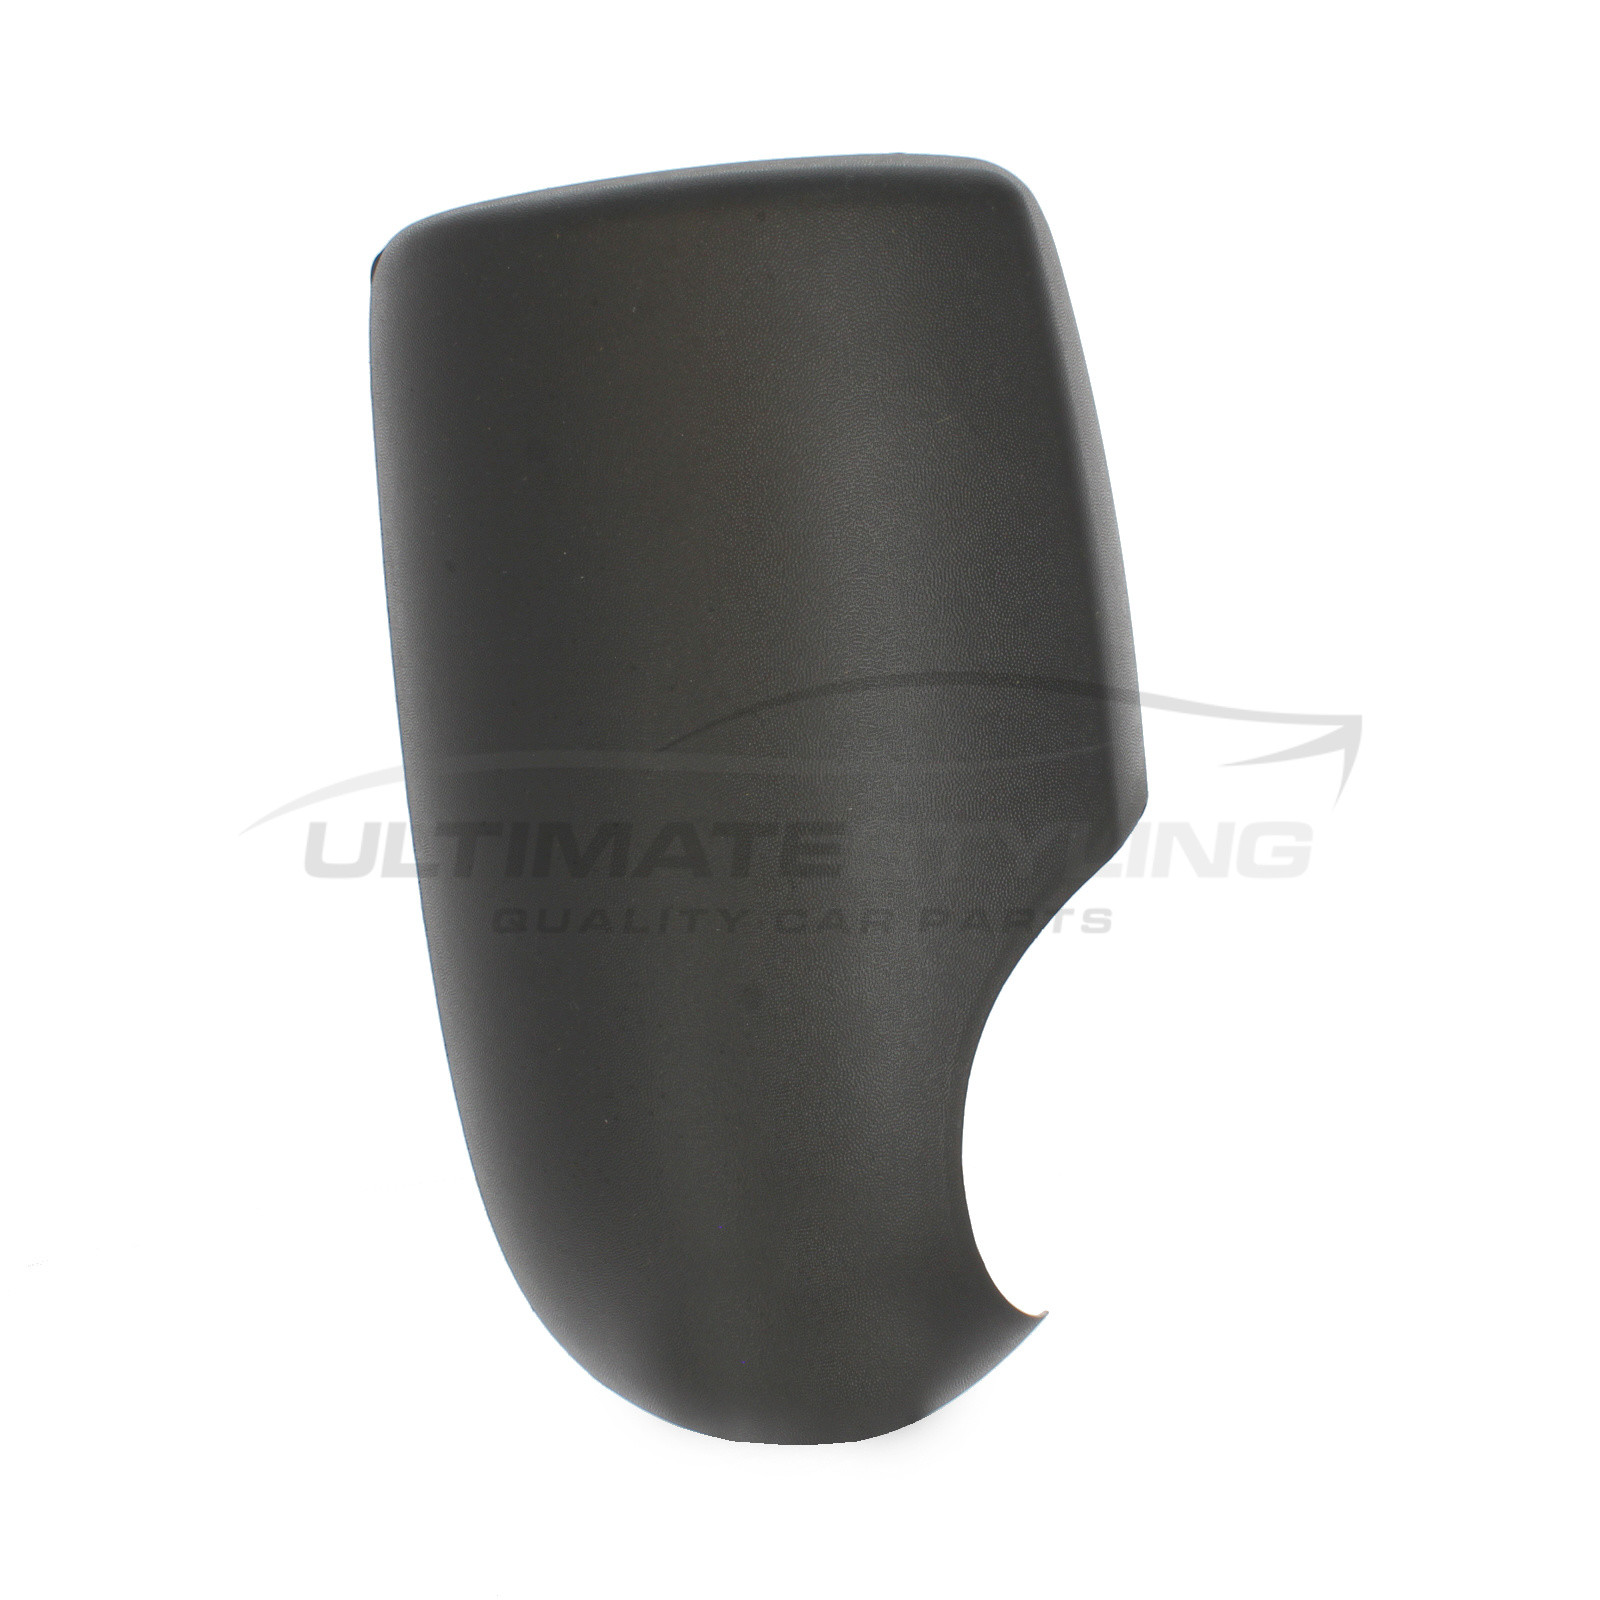 Ford Transit 2000-2014 Wing Mirror Cover Cap Casing Black (Textured) Drivers Side (RH)